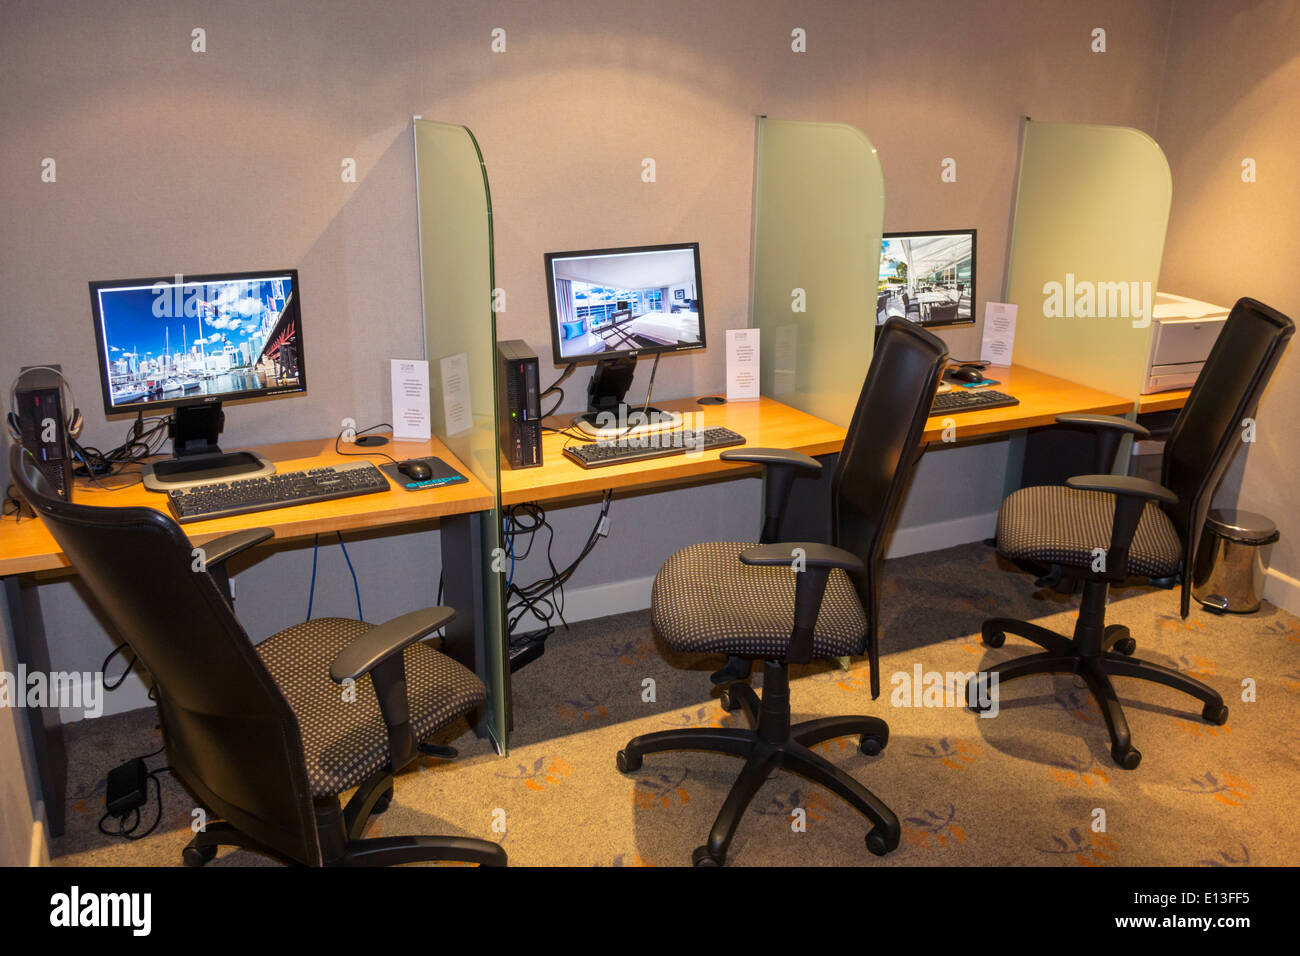 Sydney Australia,Sussex Street,Four Points by Sheraton,hotel,center,centre,Internet access,computer,monitors,screens,office swivel chairs,keyboards,AU Stock Photo